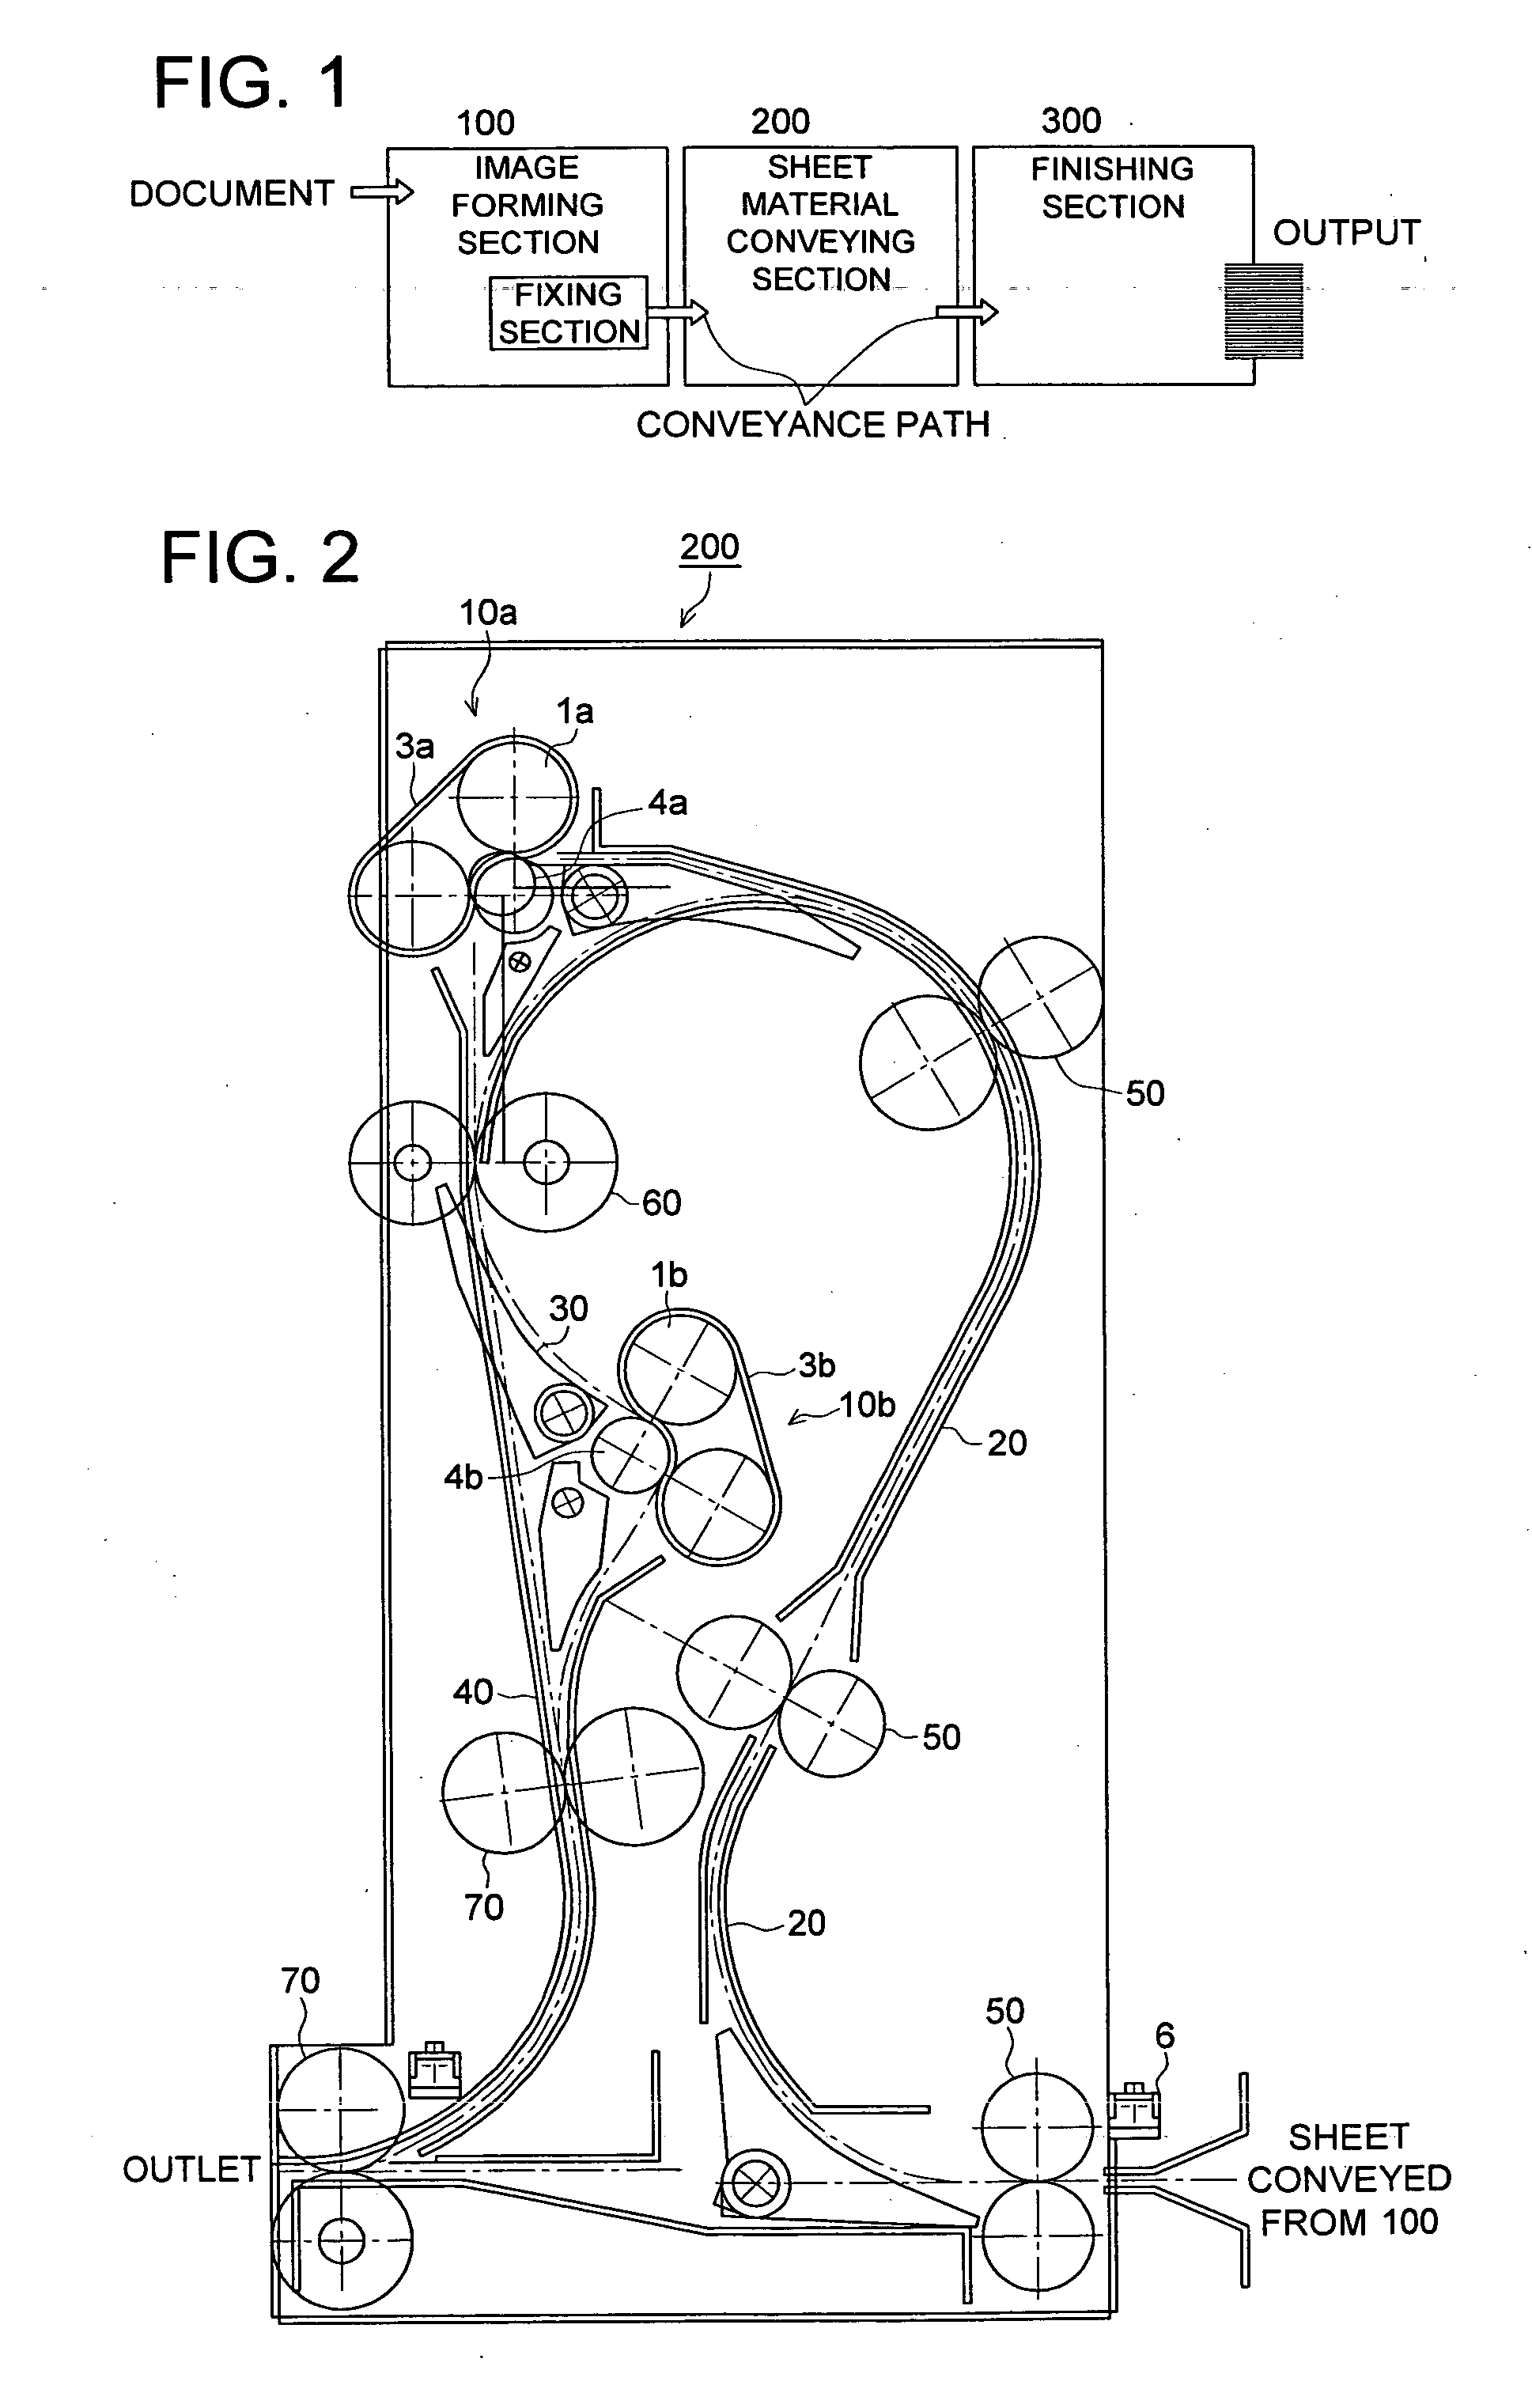 Image forming apparatus and sheet material conveyance device used therein